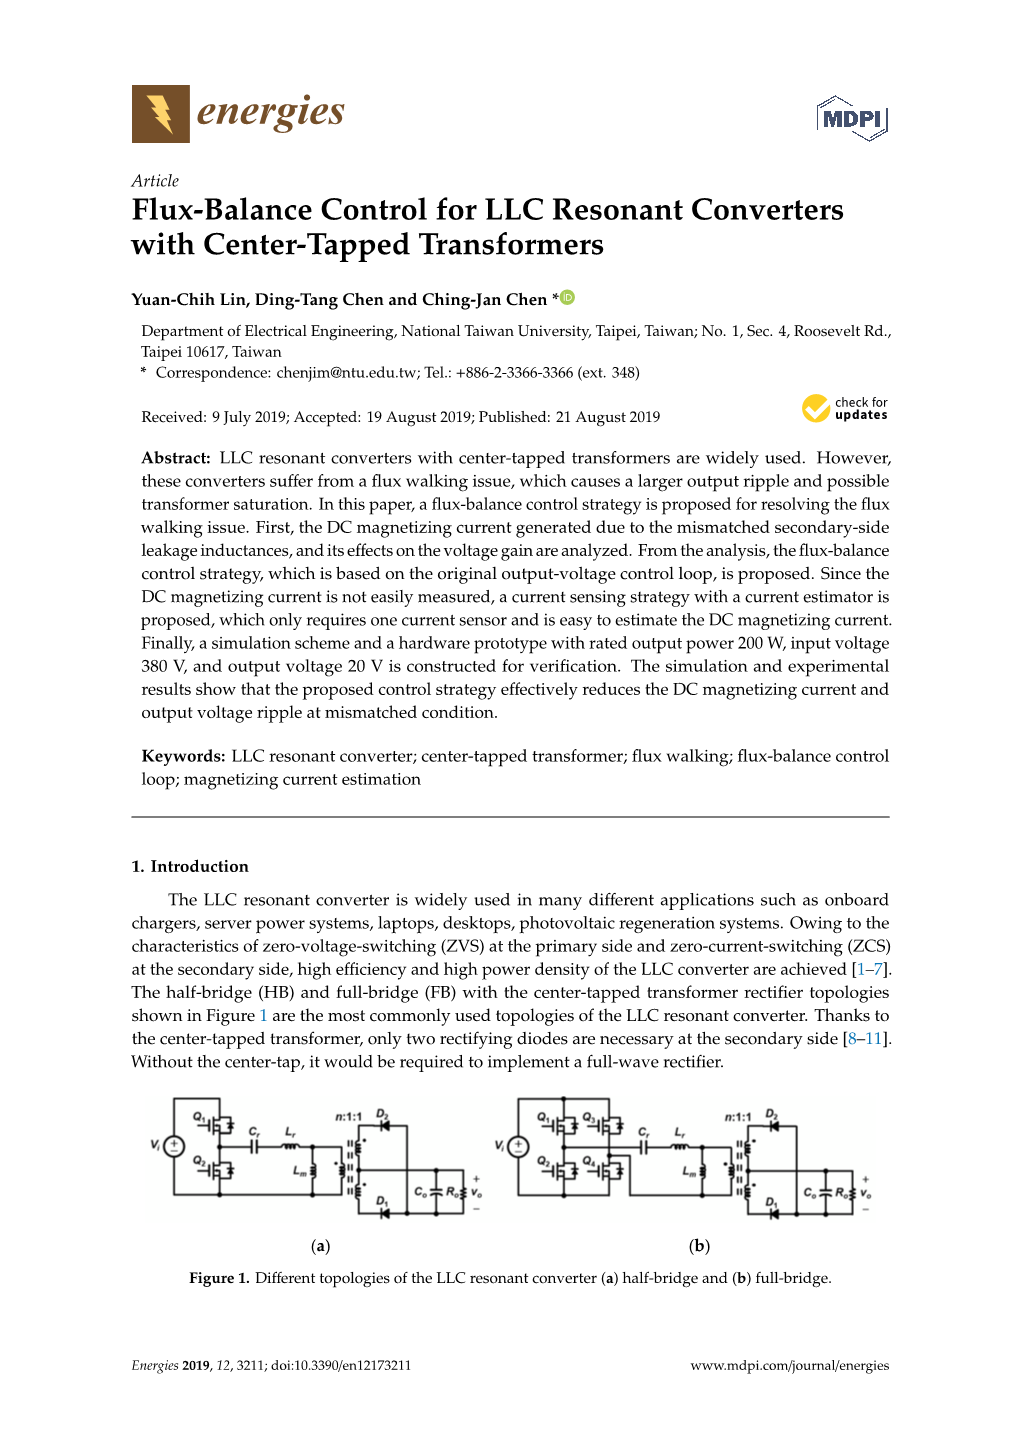 Flux-Balance Control for LLC Resonant Converters with Center-Tapped Transformers